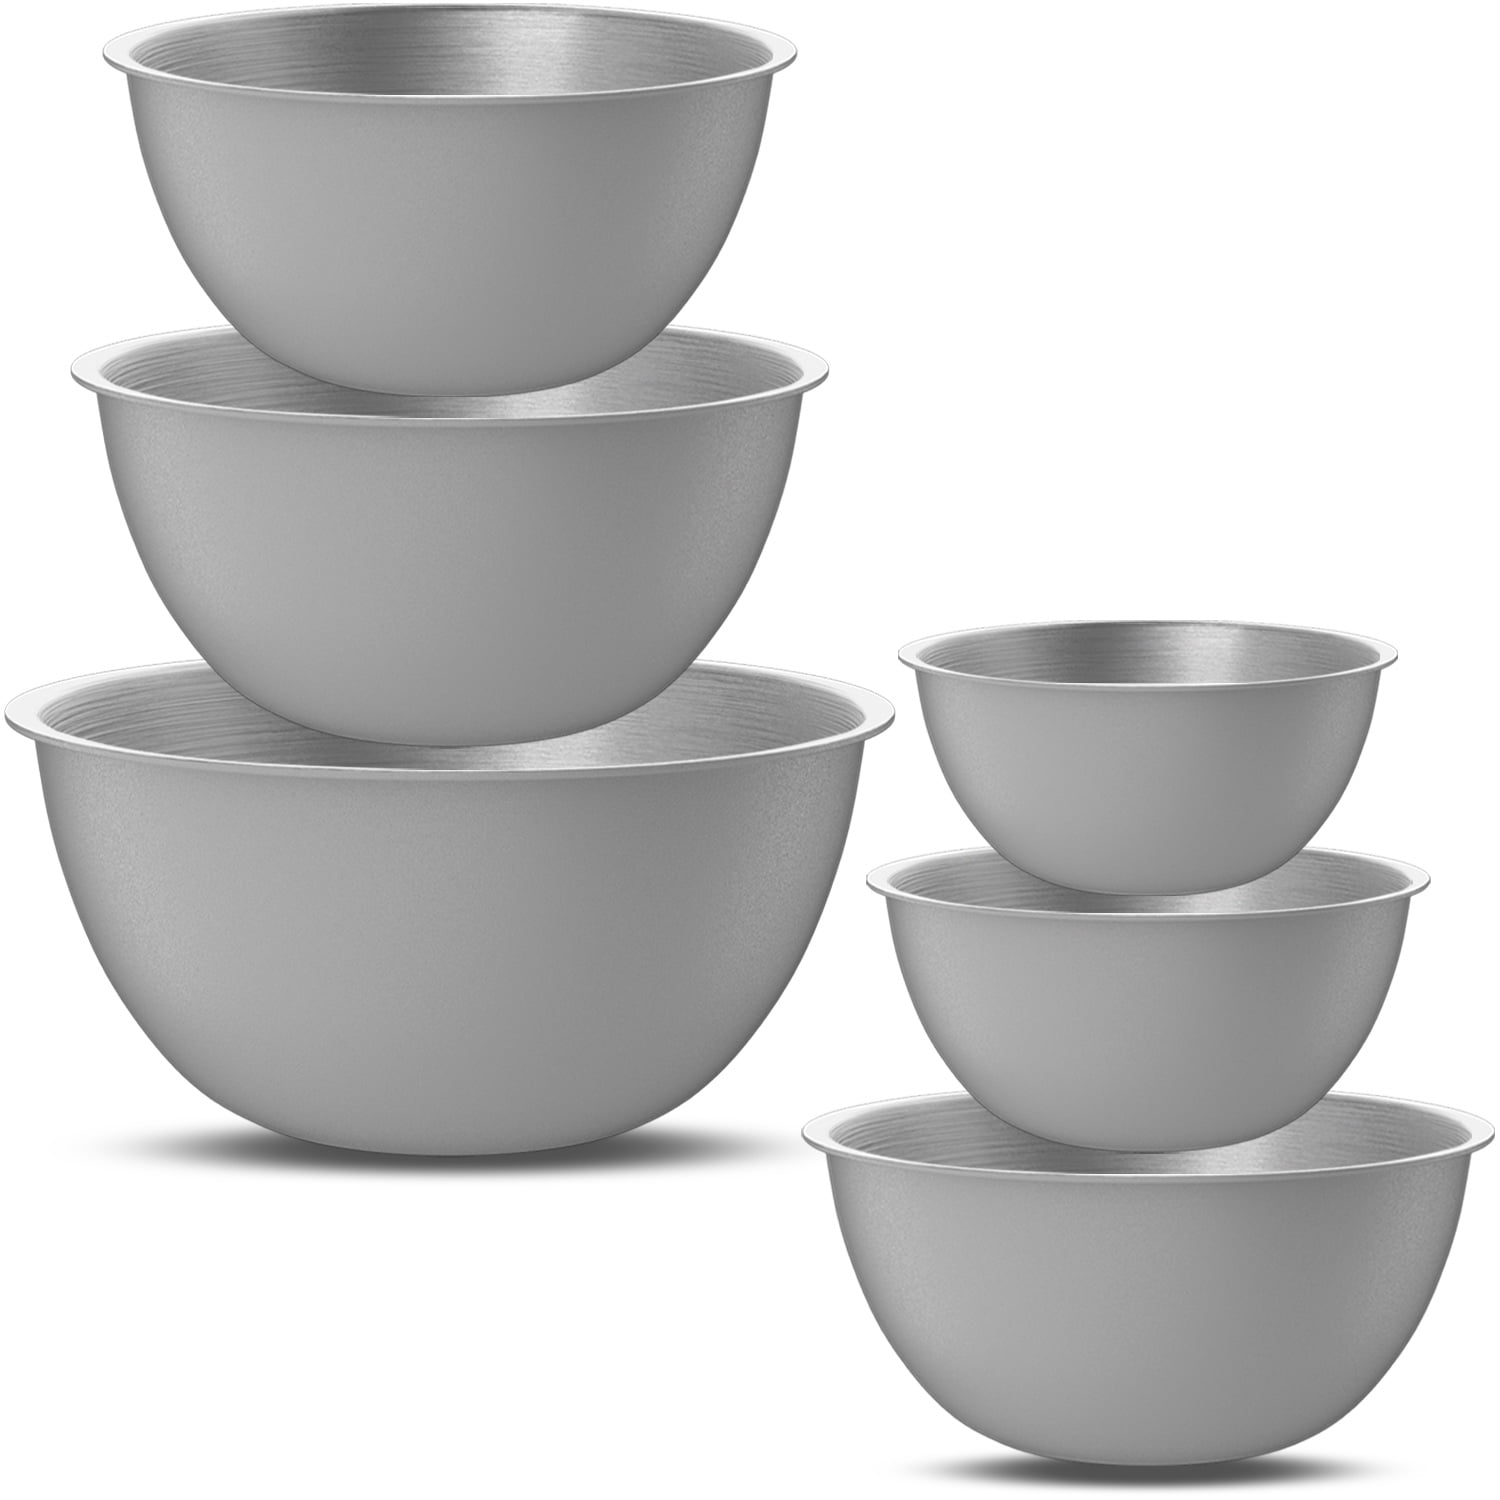 Stainless Steel Mixing Bowls – On The Table